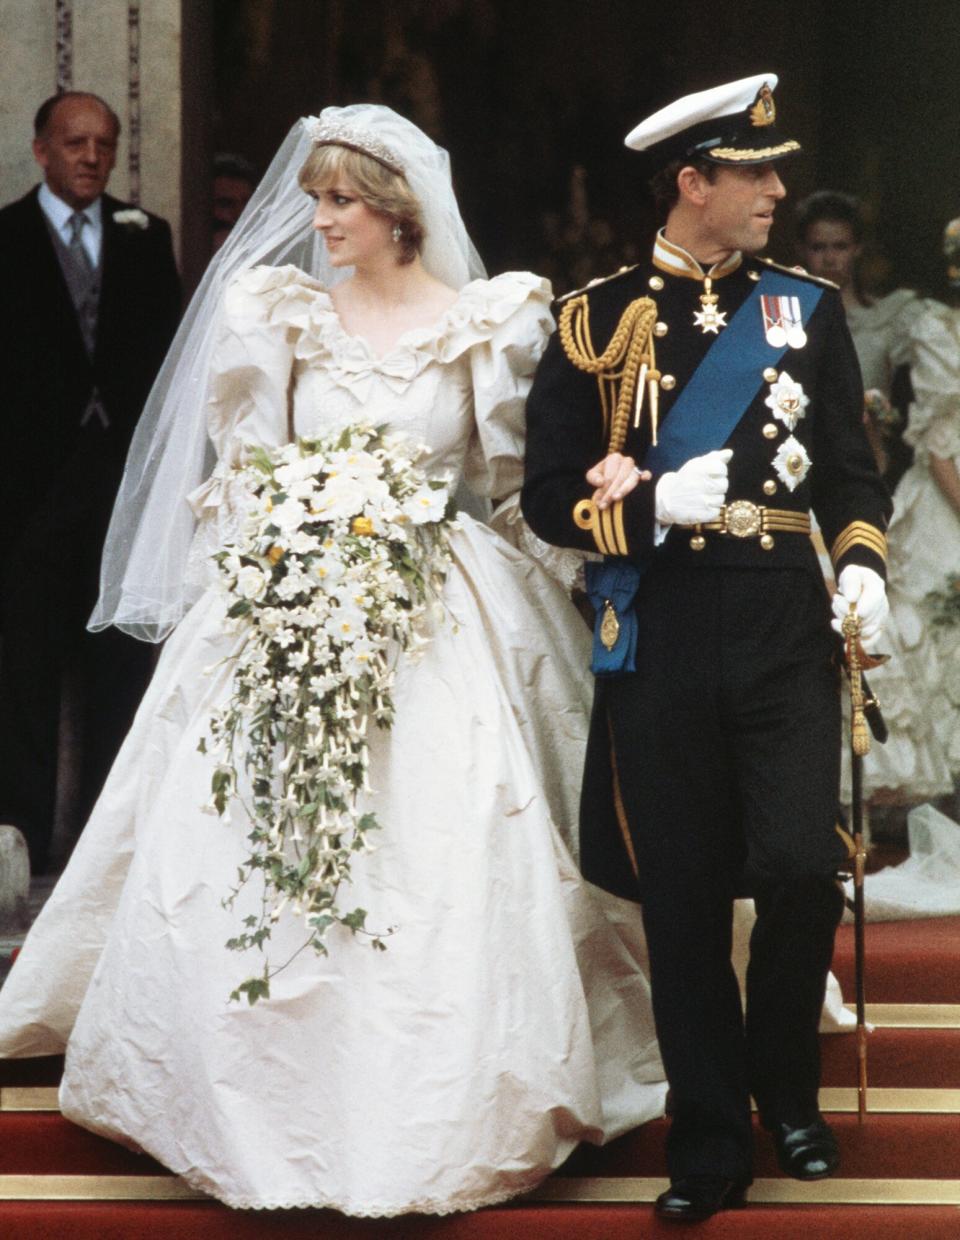 The wedding of Prince Charles and Lady Diana Spencer at St Paul's Cathedral in London, 29th July 1981. The couple leave the cathedral after the ceremony